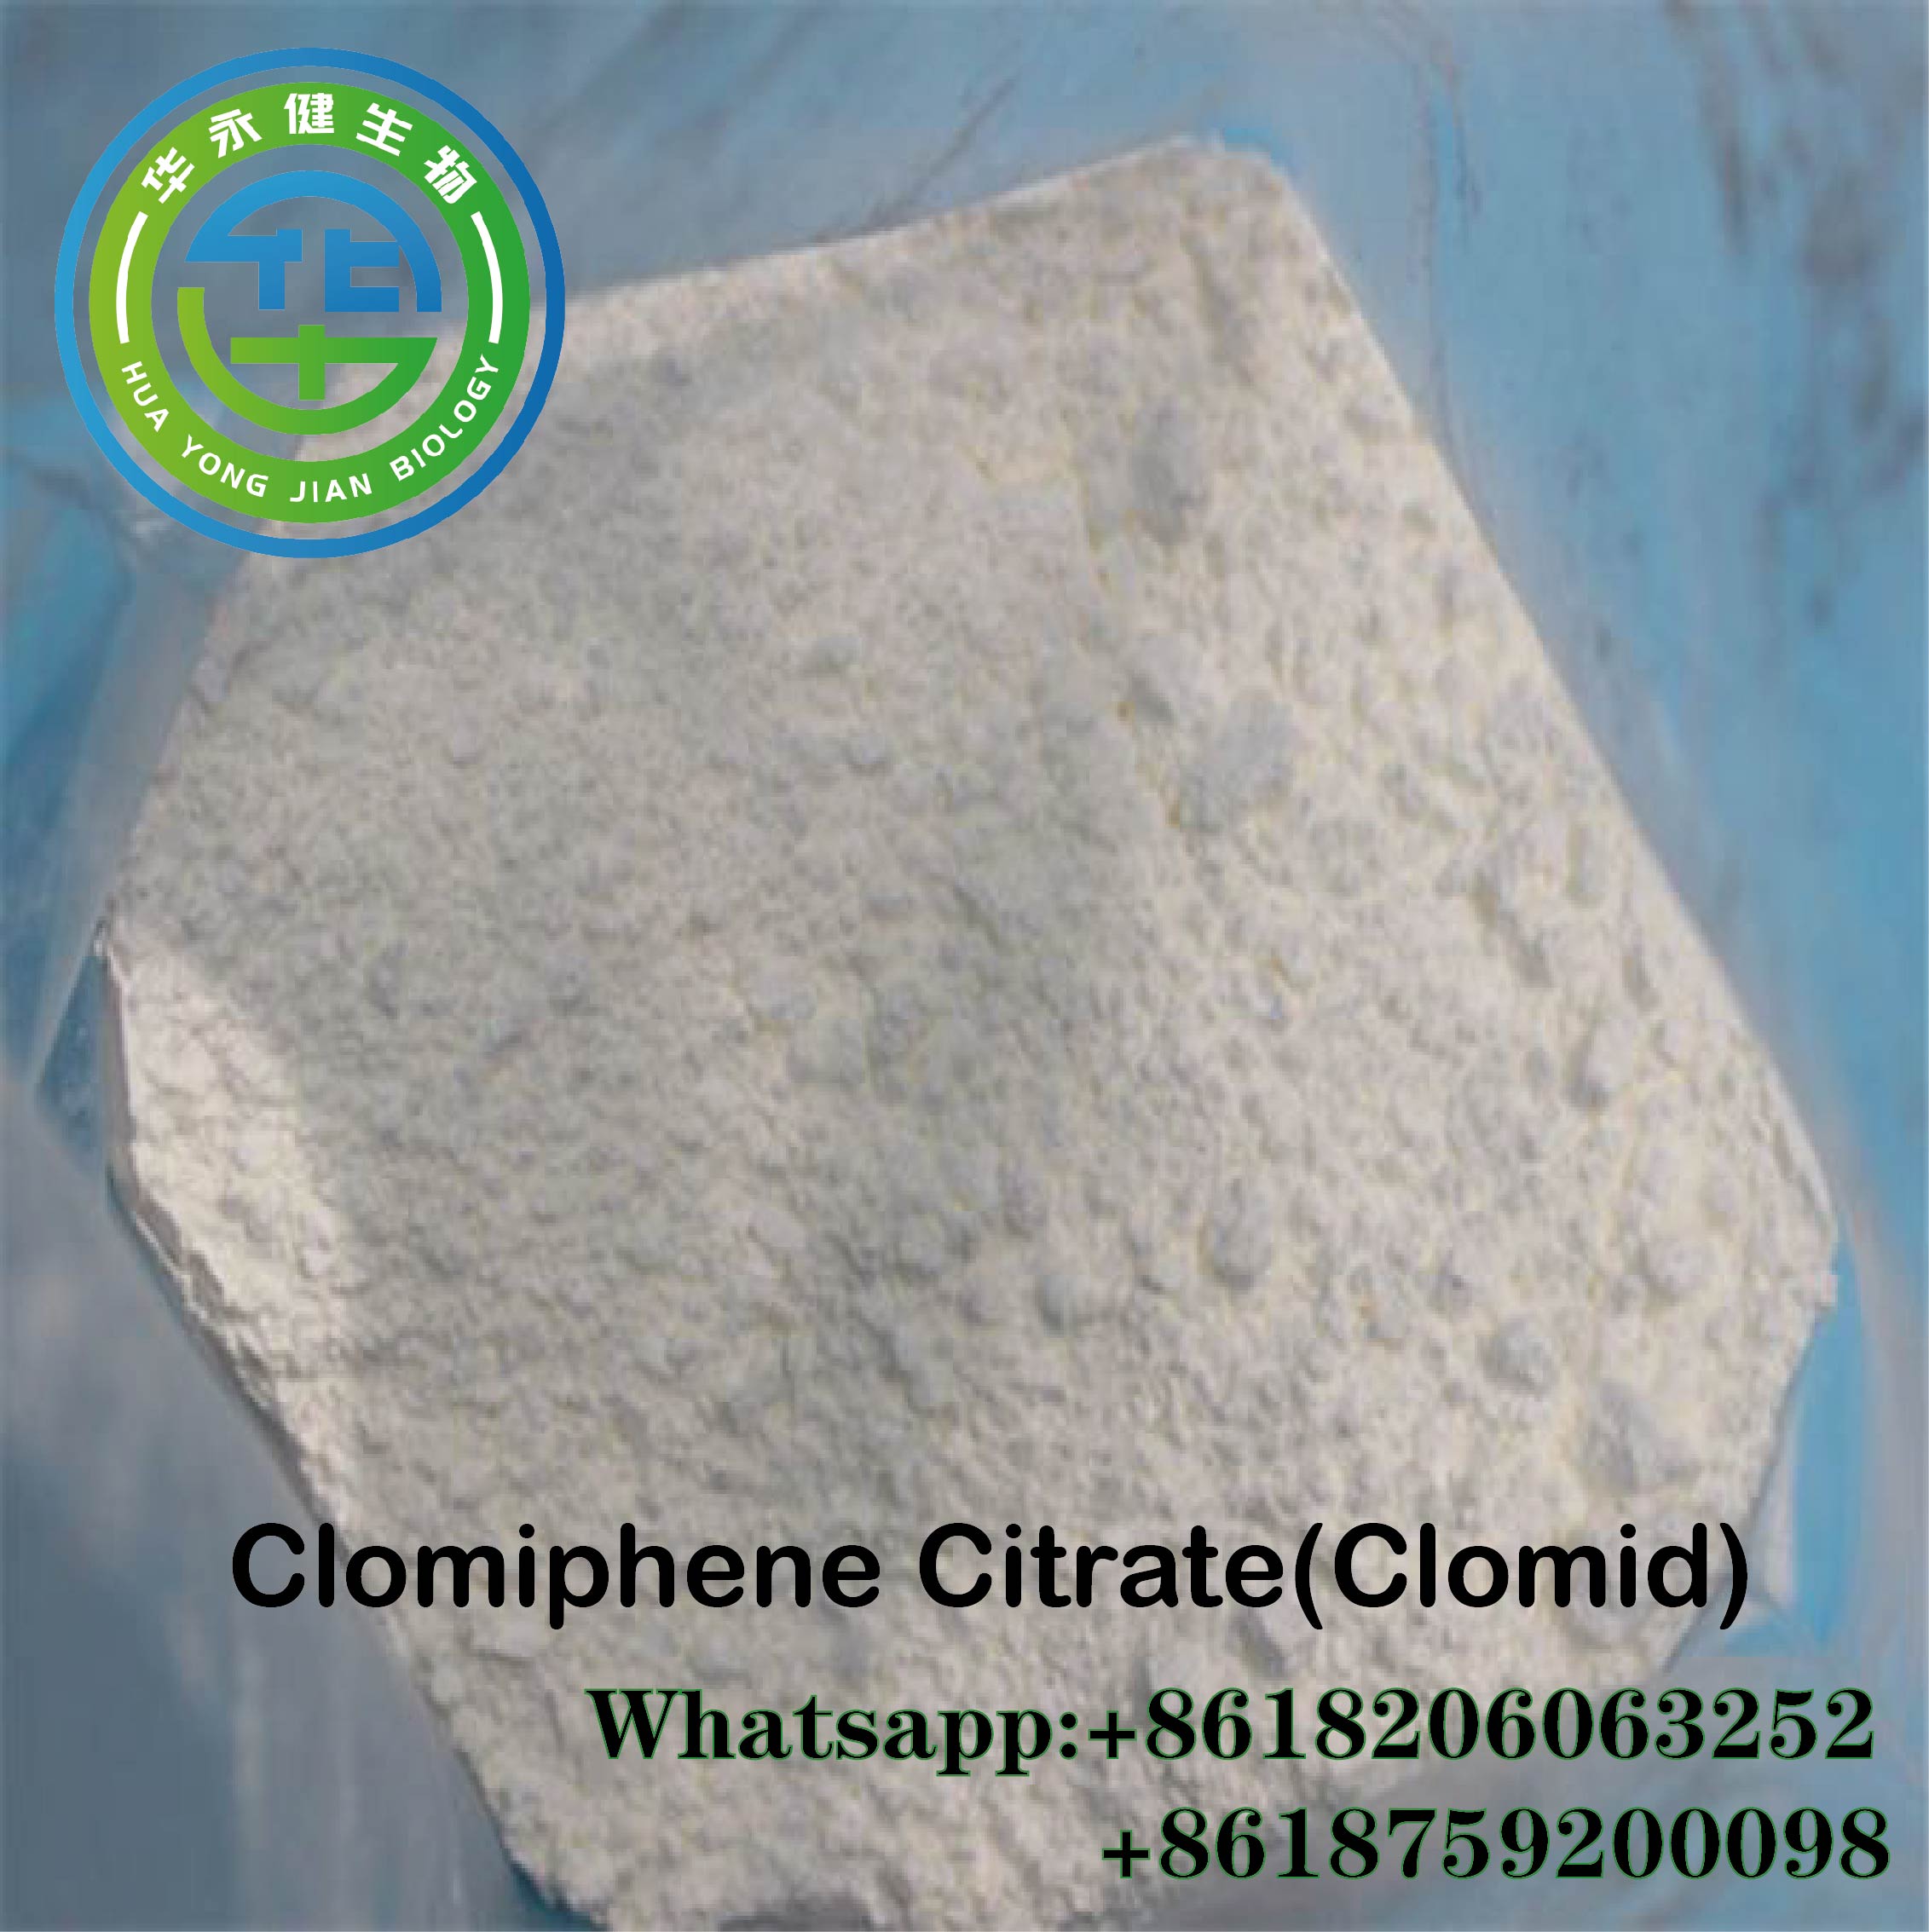 Clomiphine Citrate CasNO. 50-41-9 Anti Aging Muscle Gain Steroids White Crystalline Clomid Powder